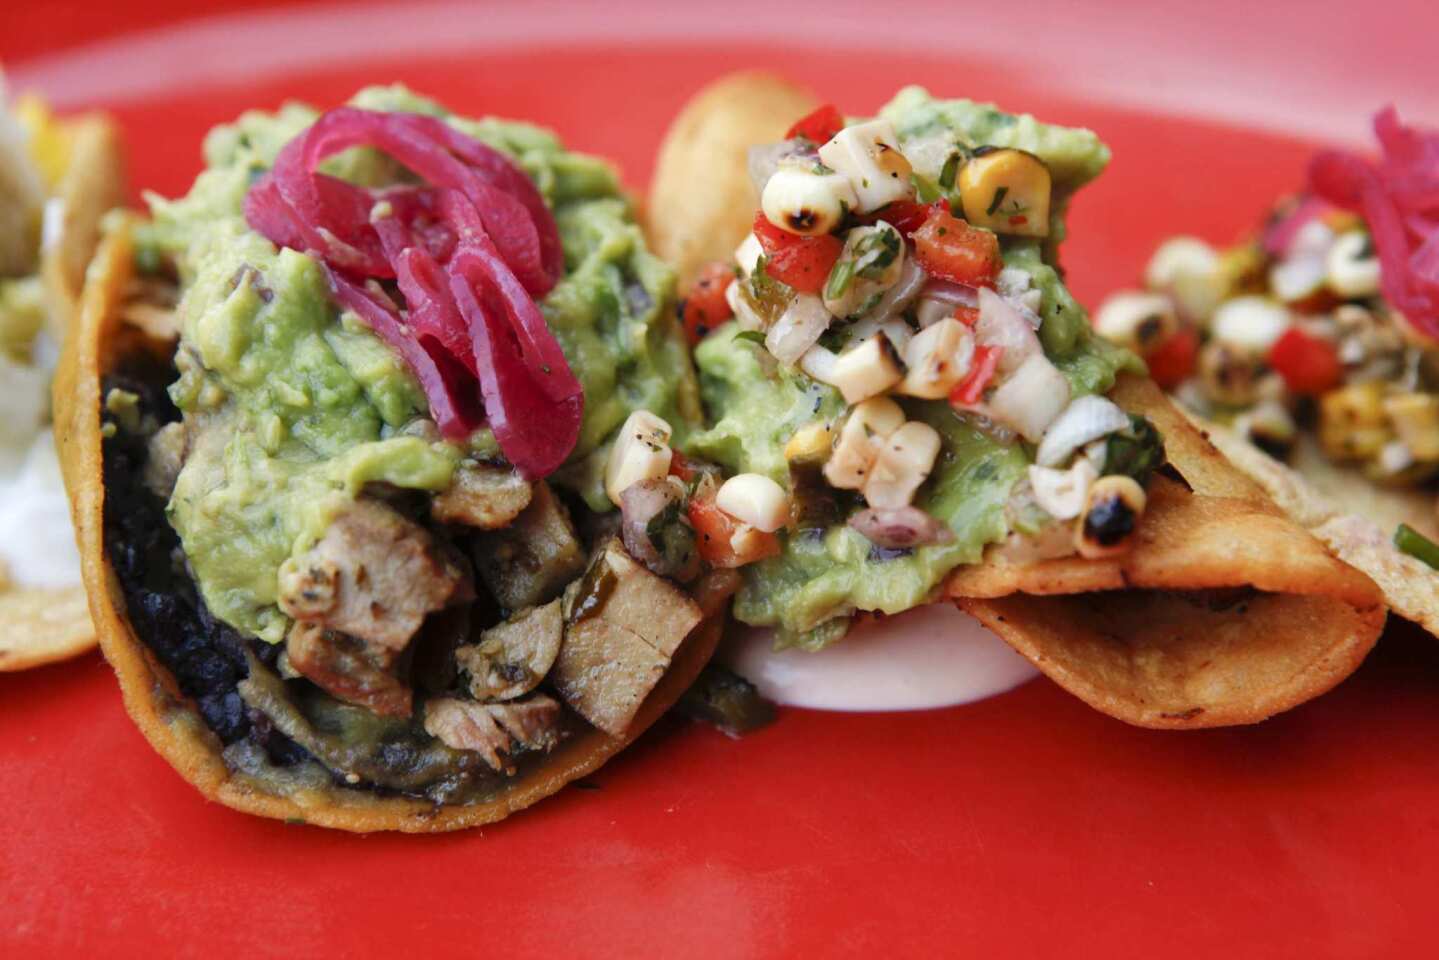 The tacos are loaded with fresh ingredients, including guacamole, roasted corn salsa and black beans.